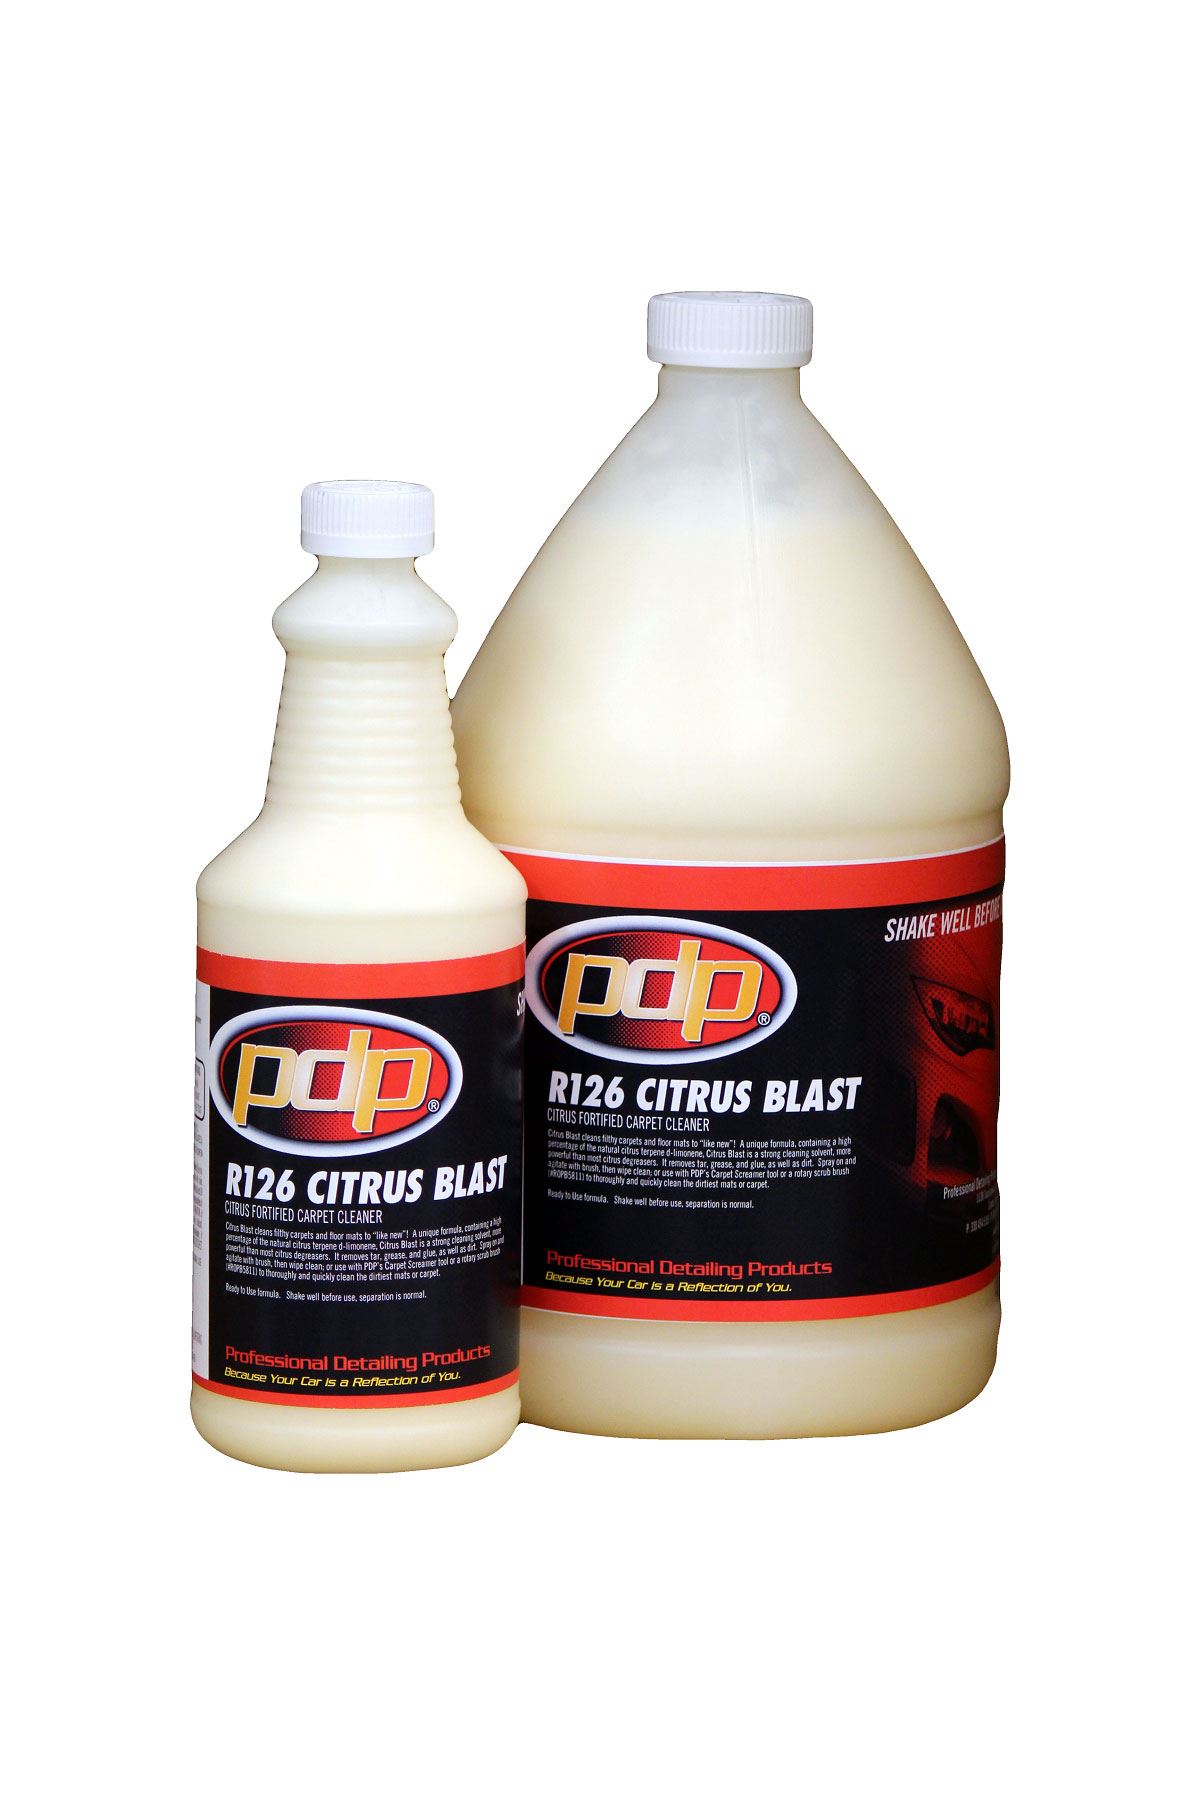 CITRUS ALL PURPOSE CLEANER. Professional Detailing Products